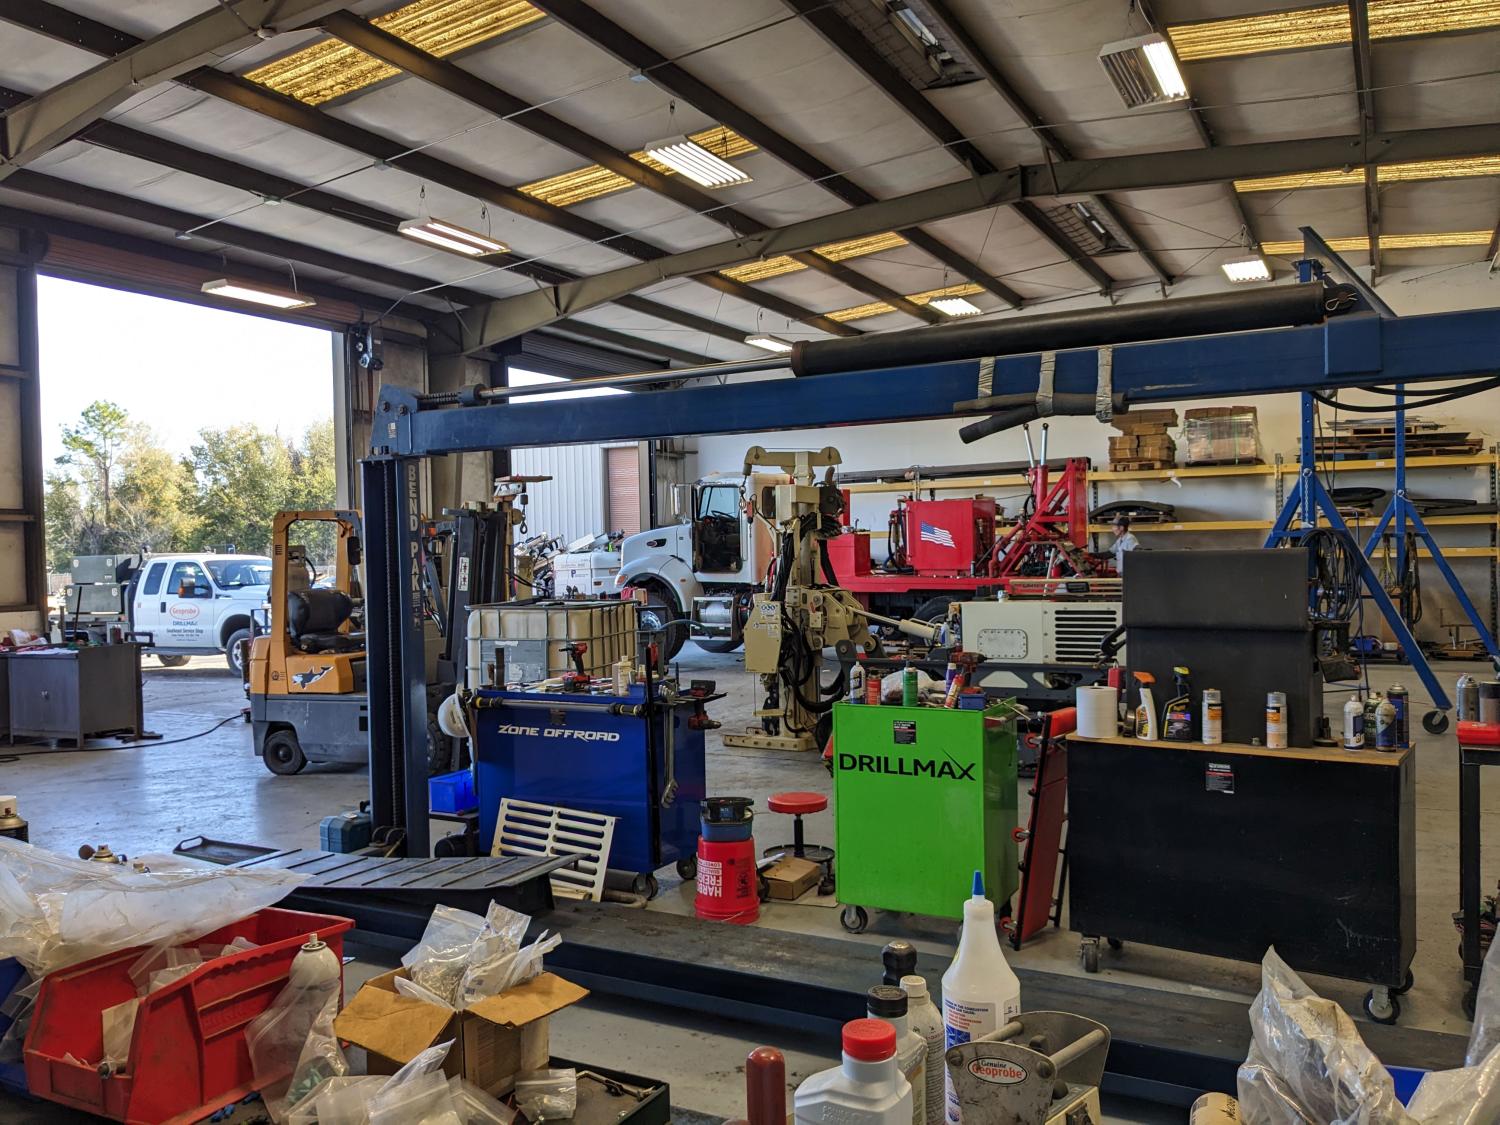 Southeast Service Center provides routine water drilling equipment maitenance